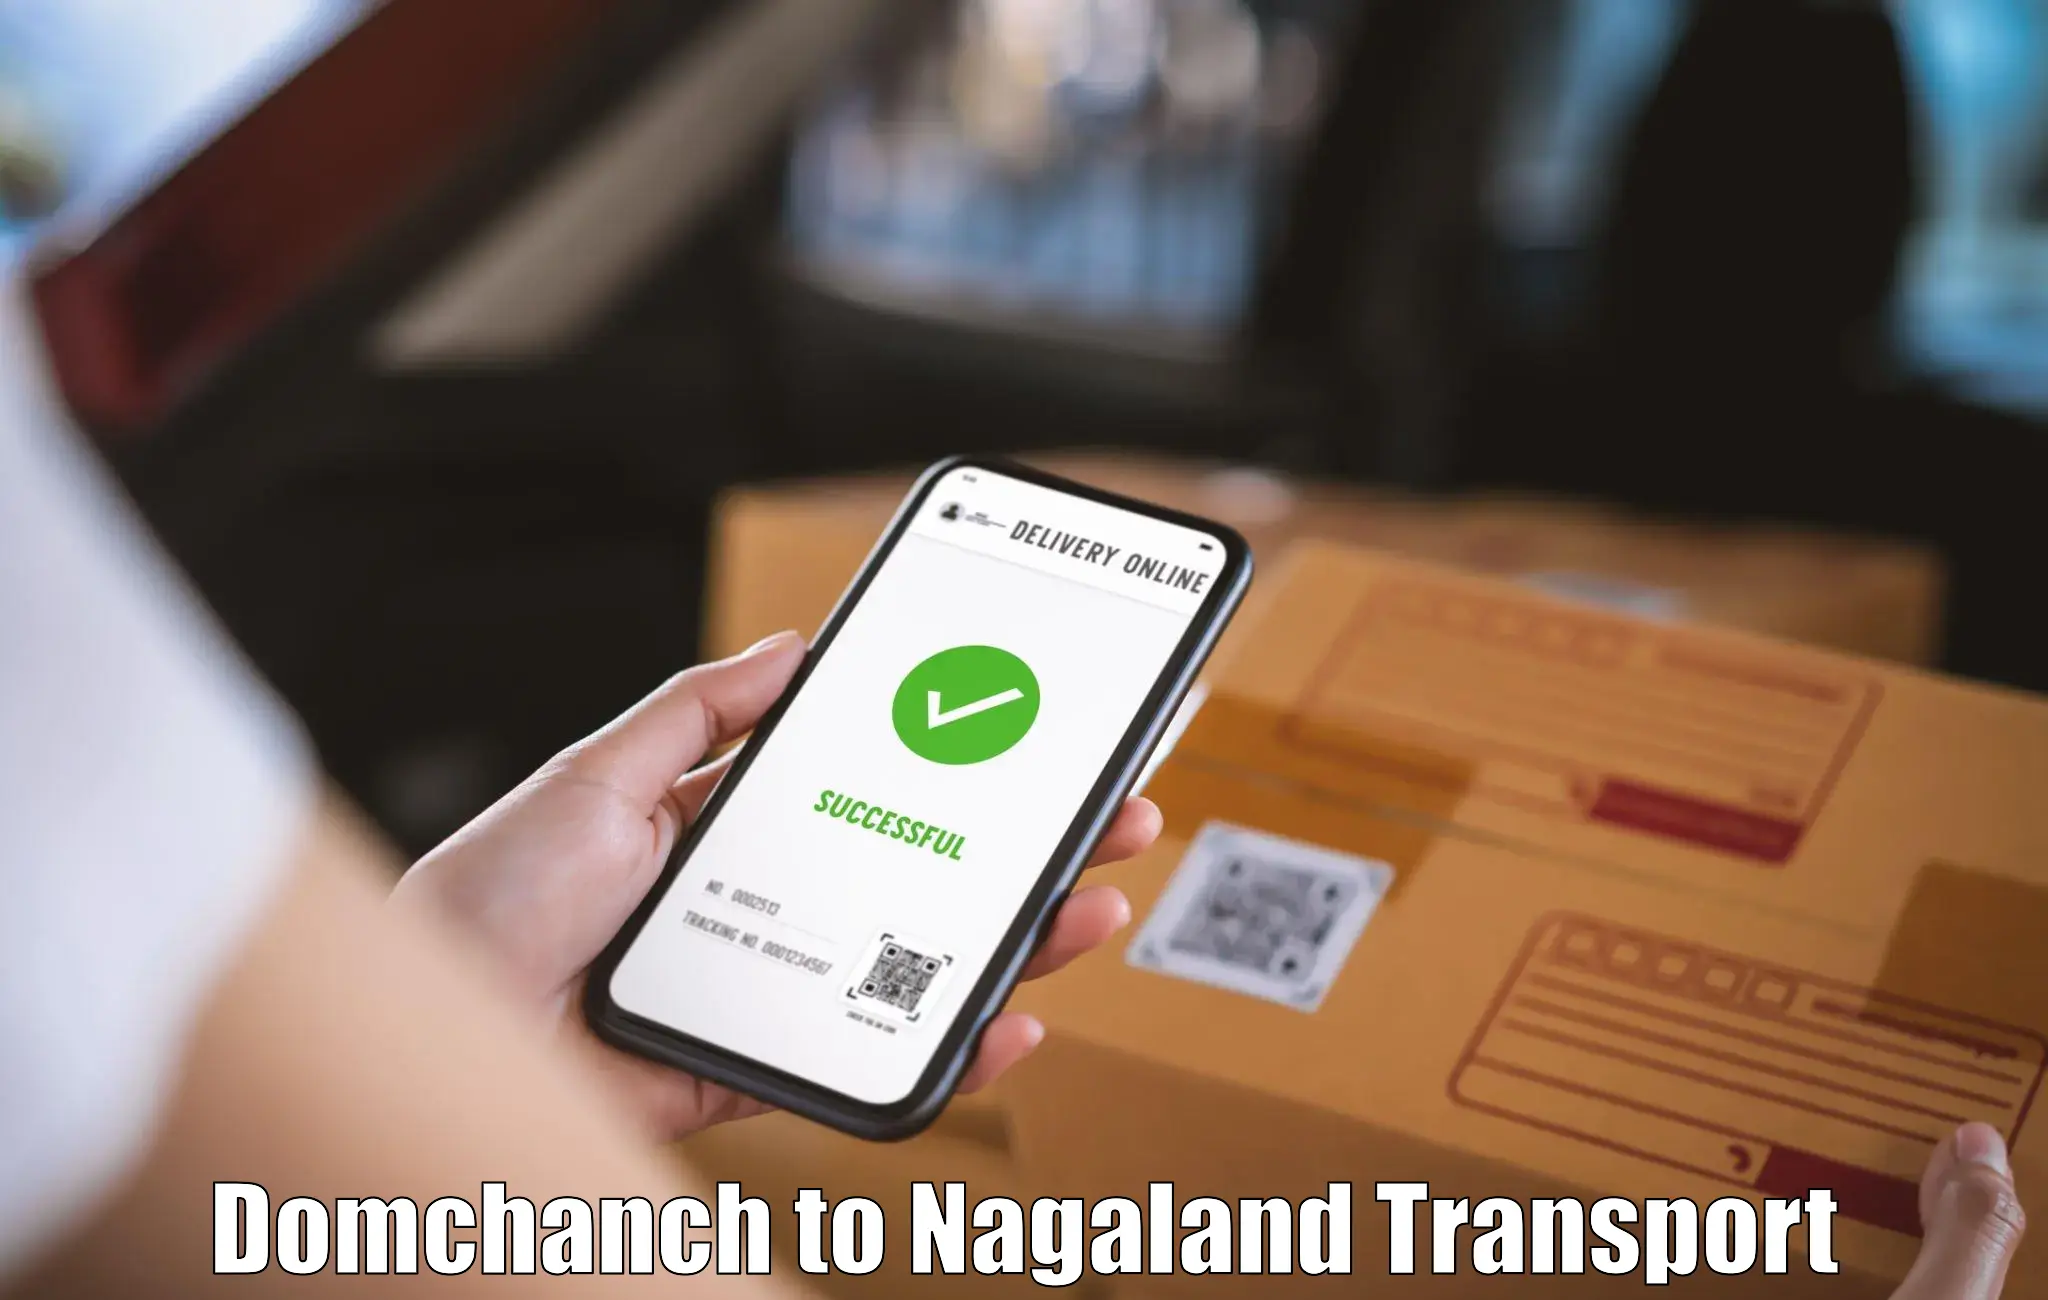 Transport shared services Domchanch to Nagaland